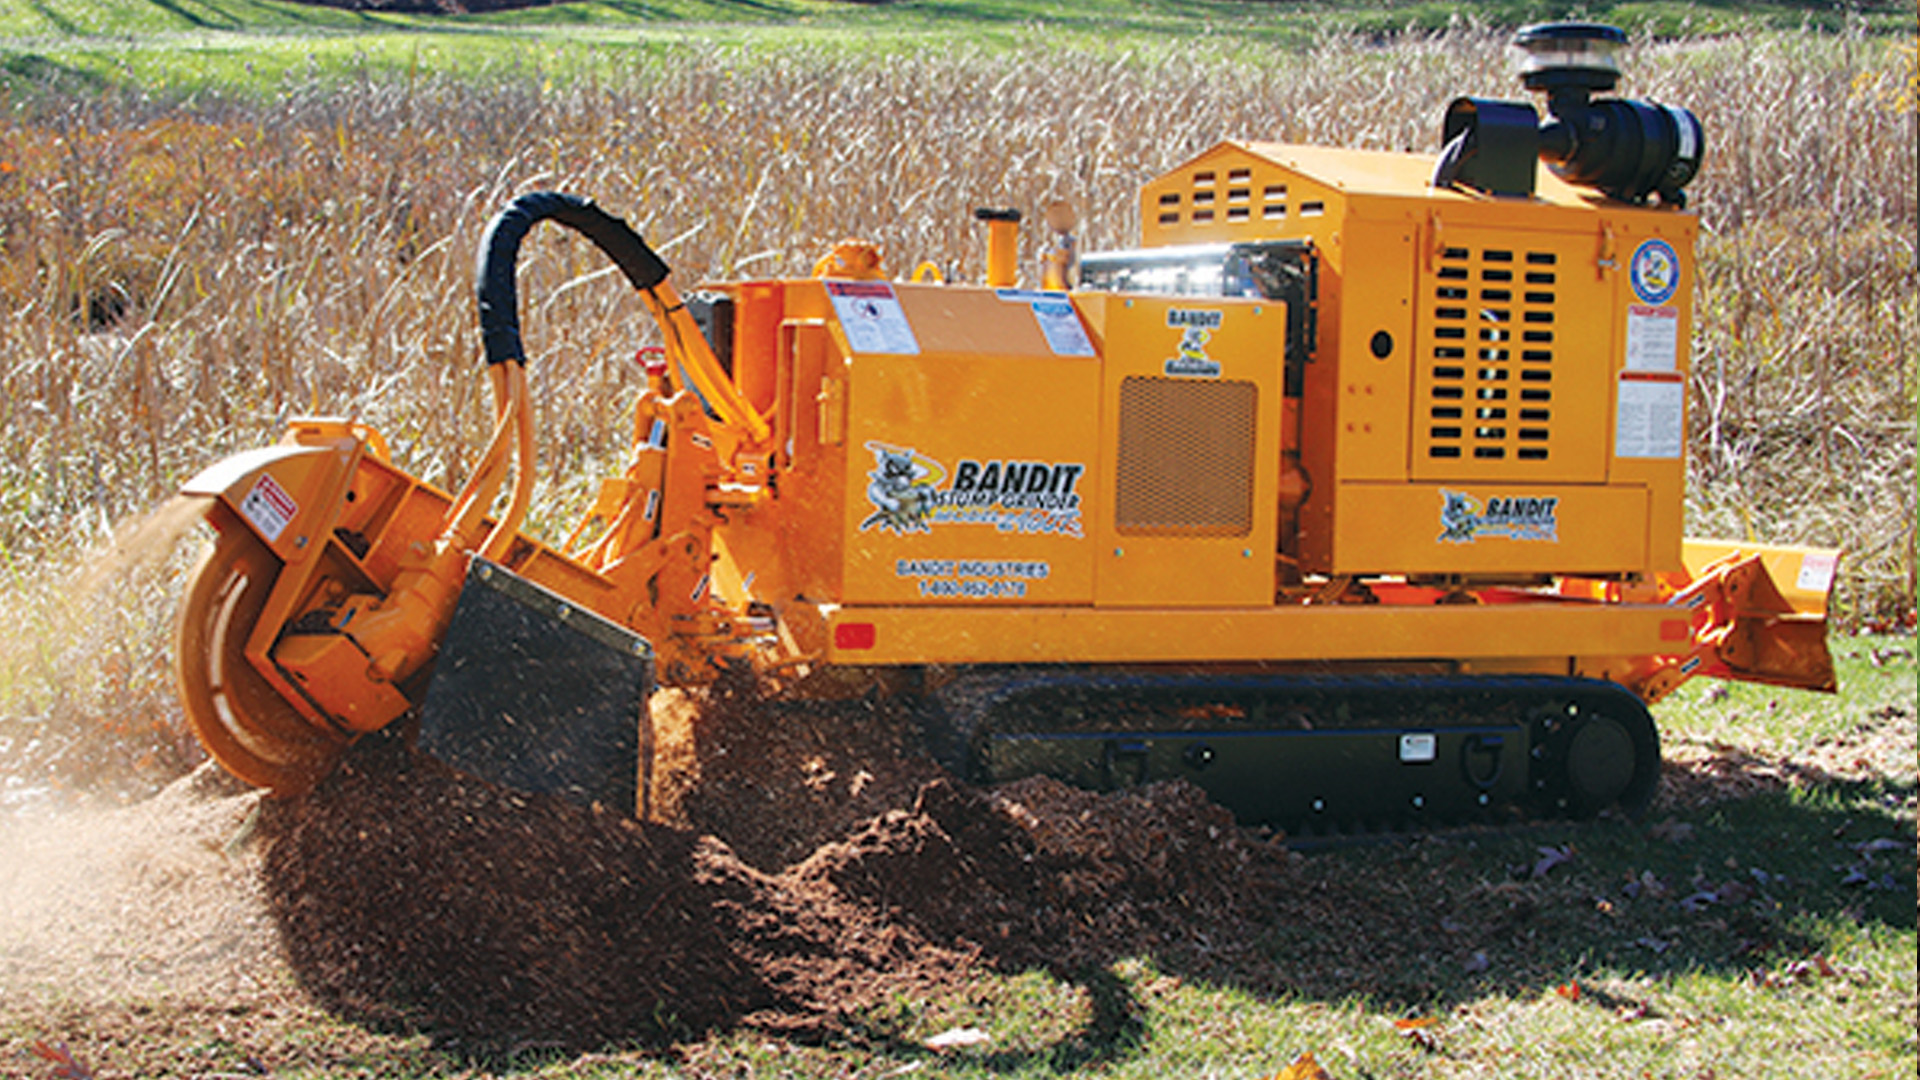 Bandit Stump Grinder 2900 from Iron Source in Delaware